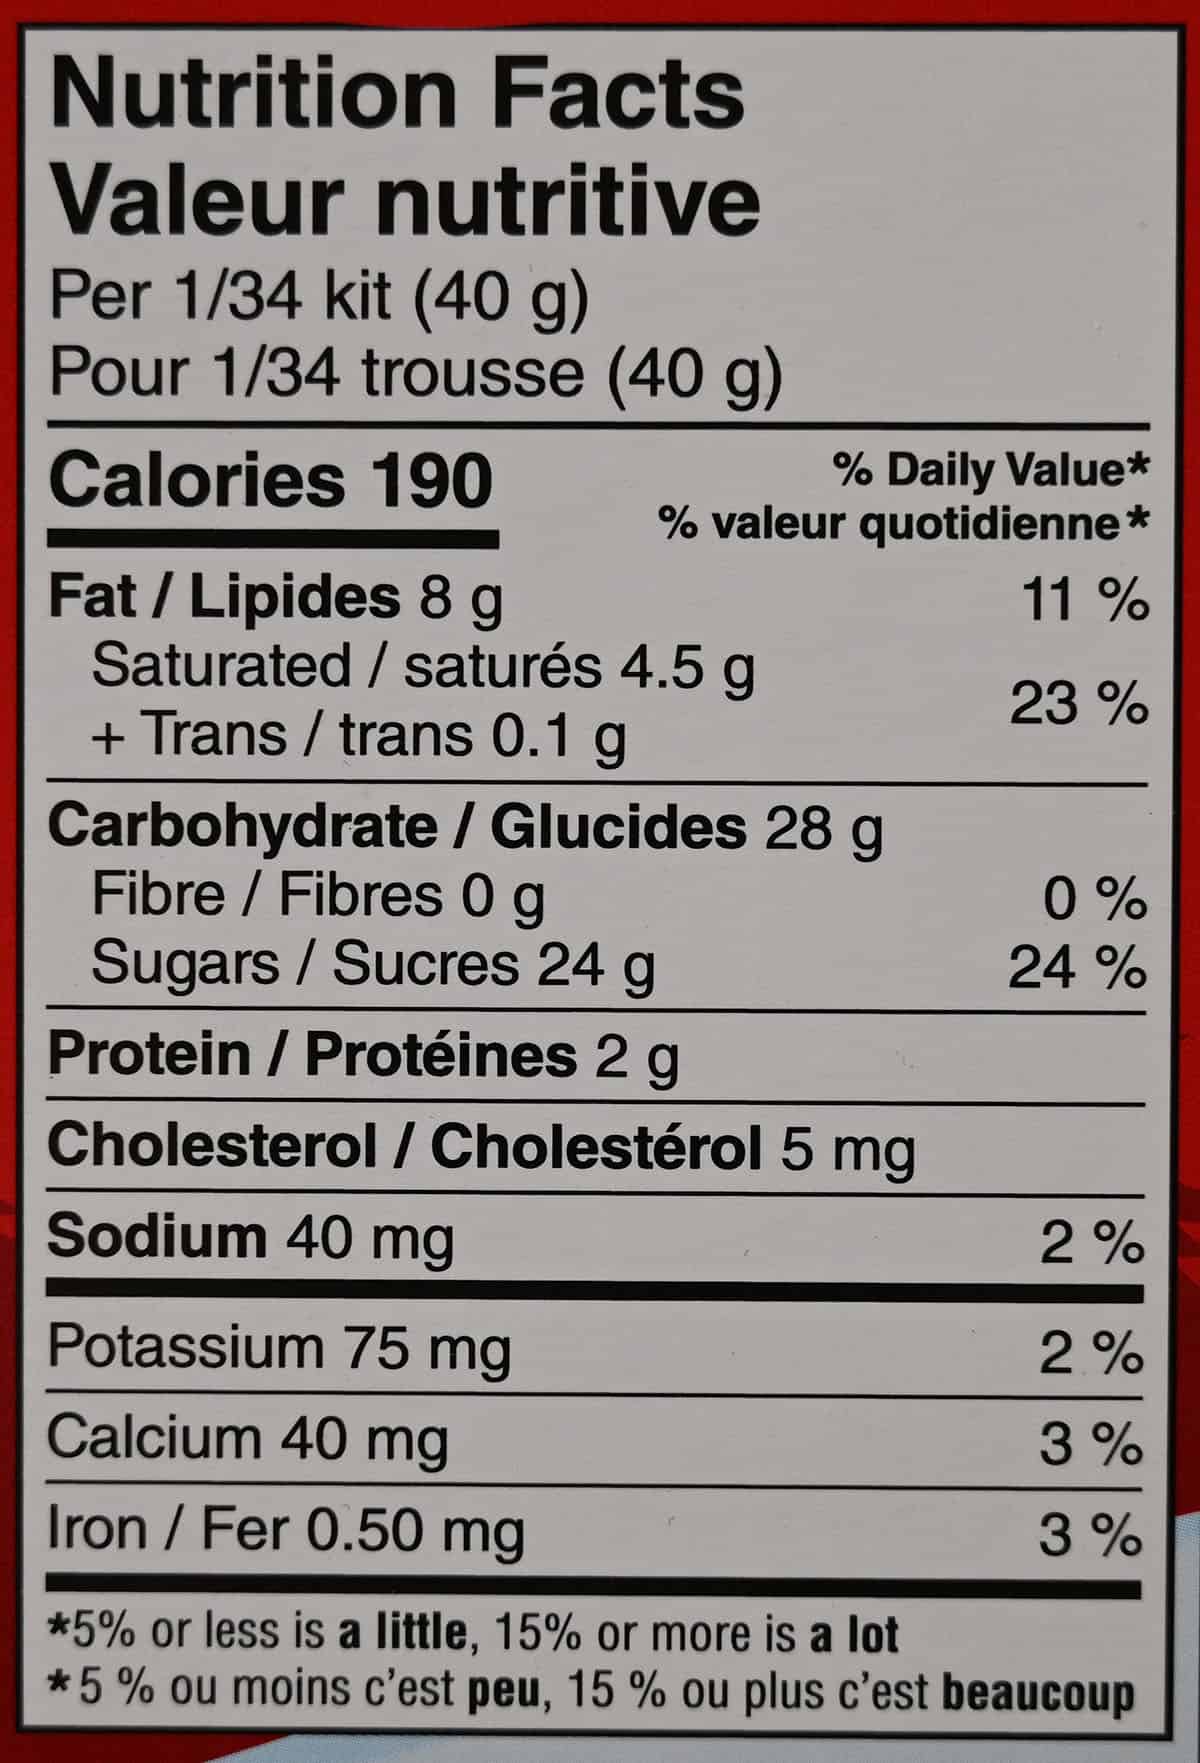 Nutrition facts from the box.